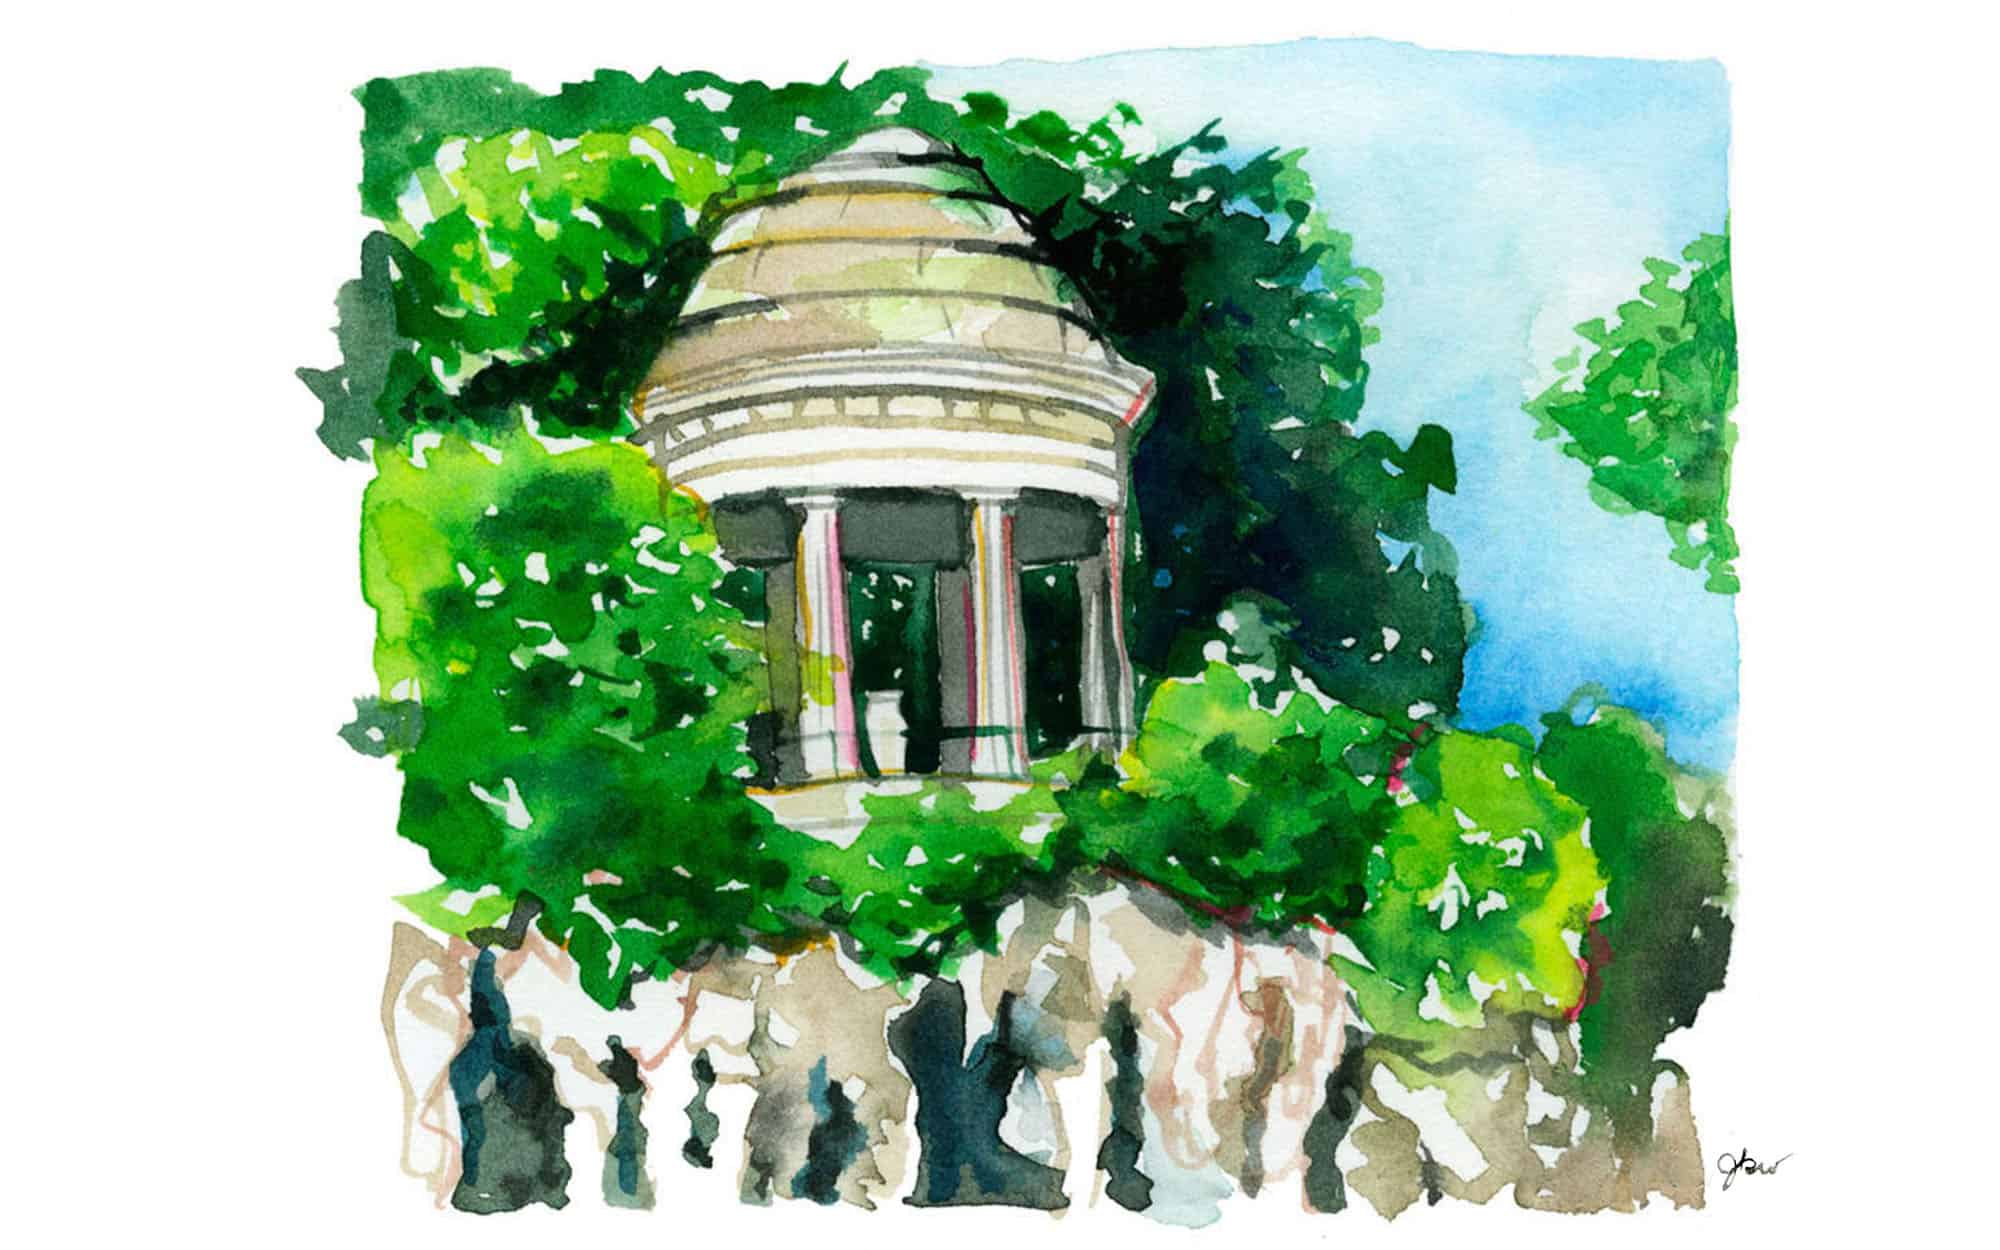 A guidebook to Paris by Artist Jessie Kanelos Weiner, including a monument in the Vincennes Woods in Paris.